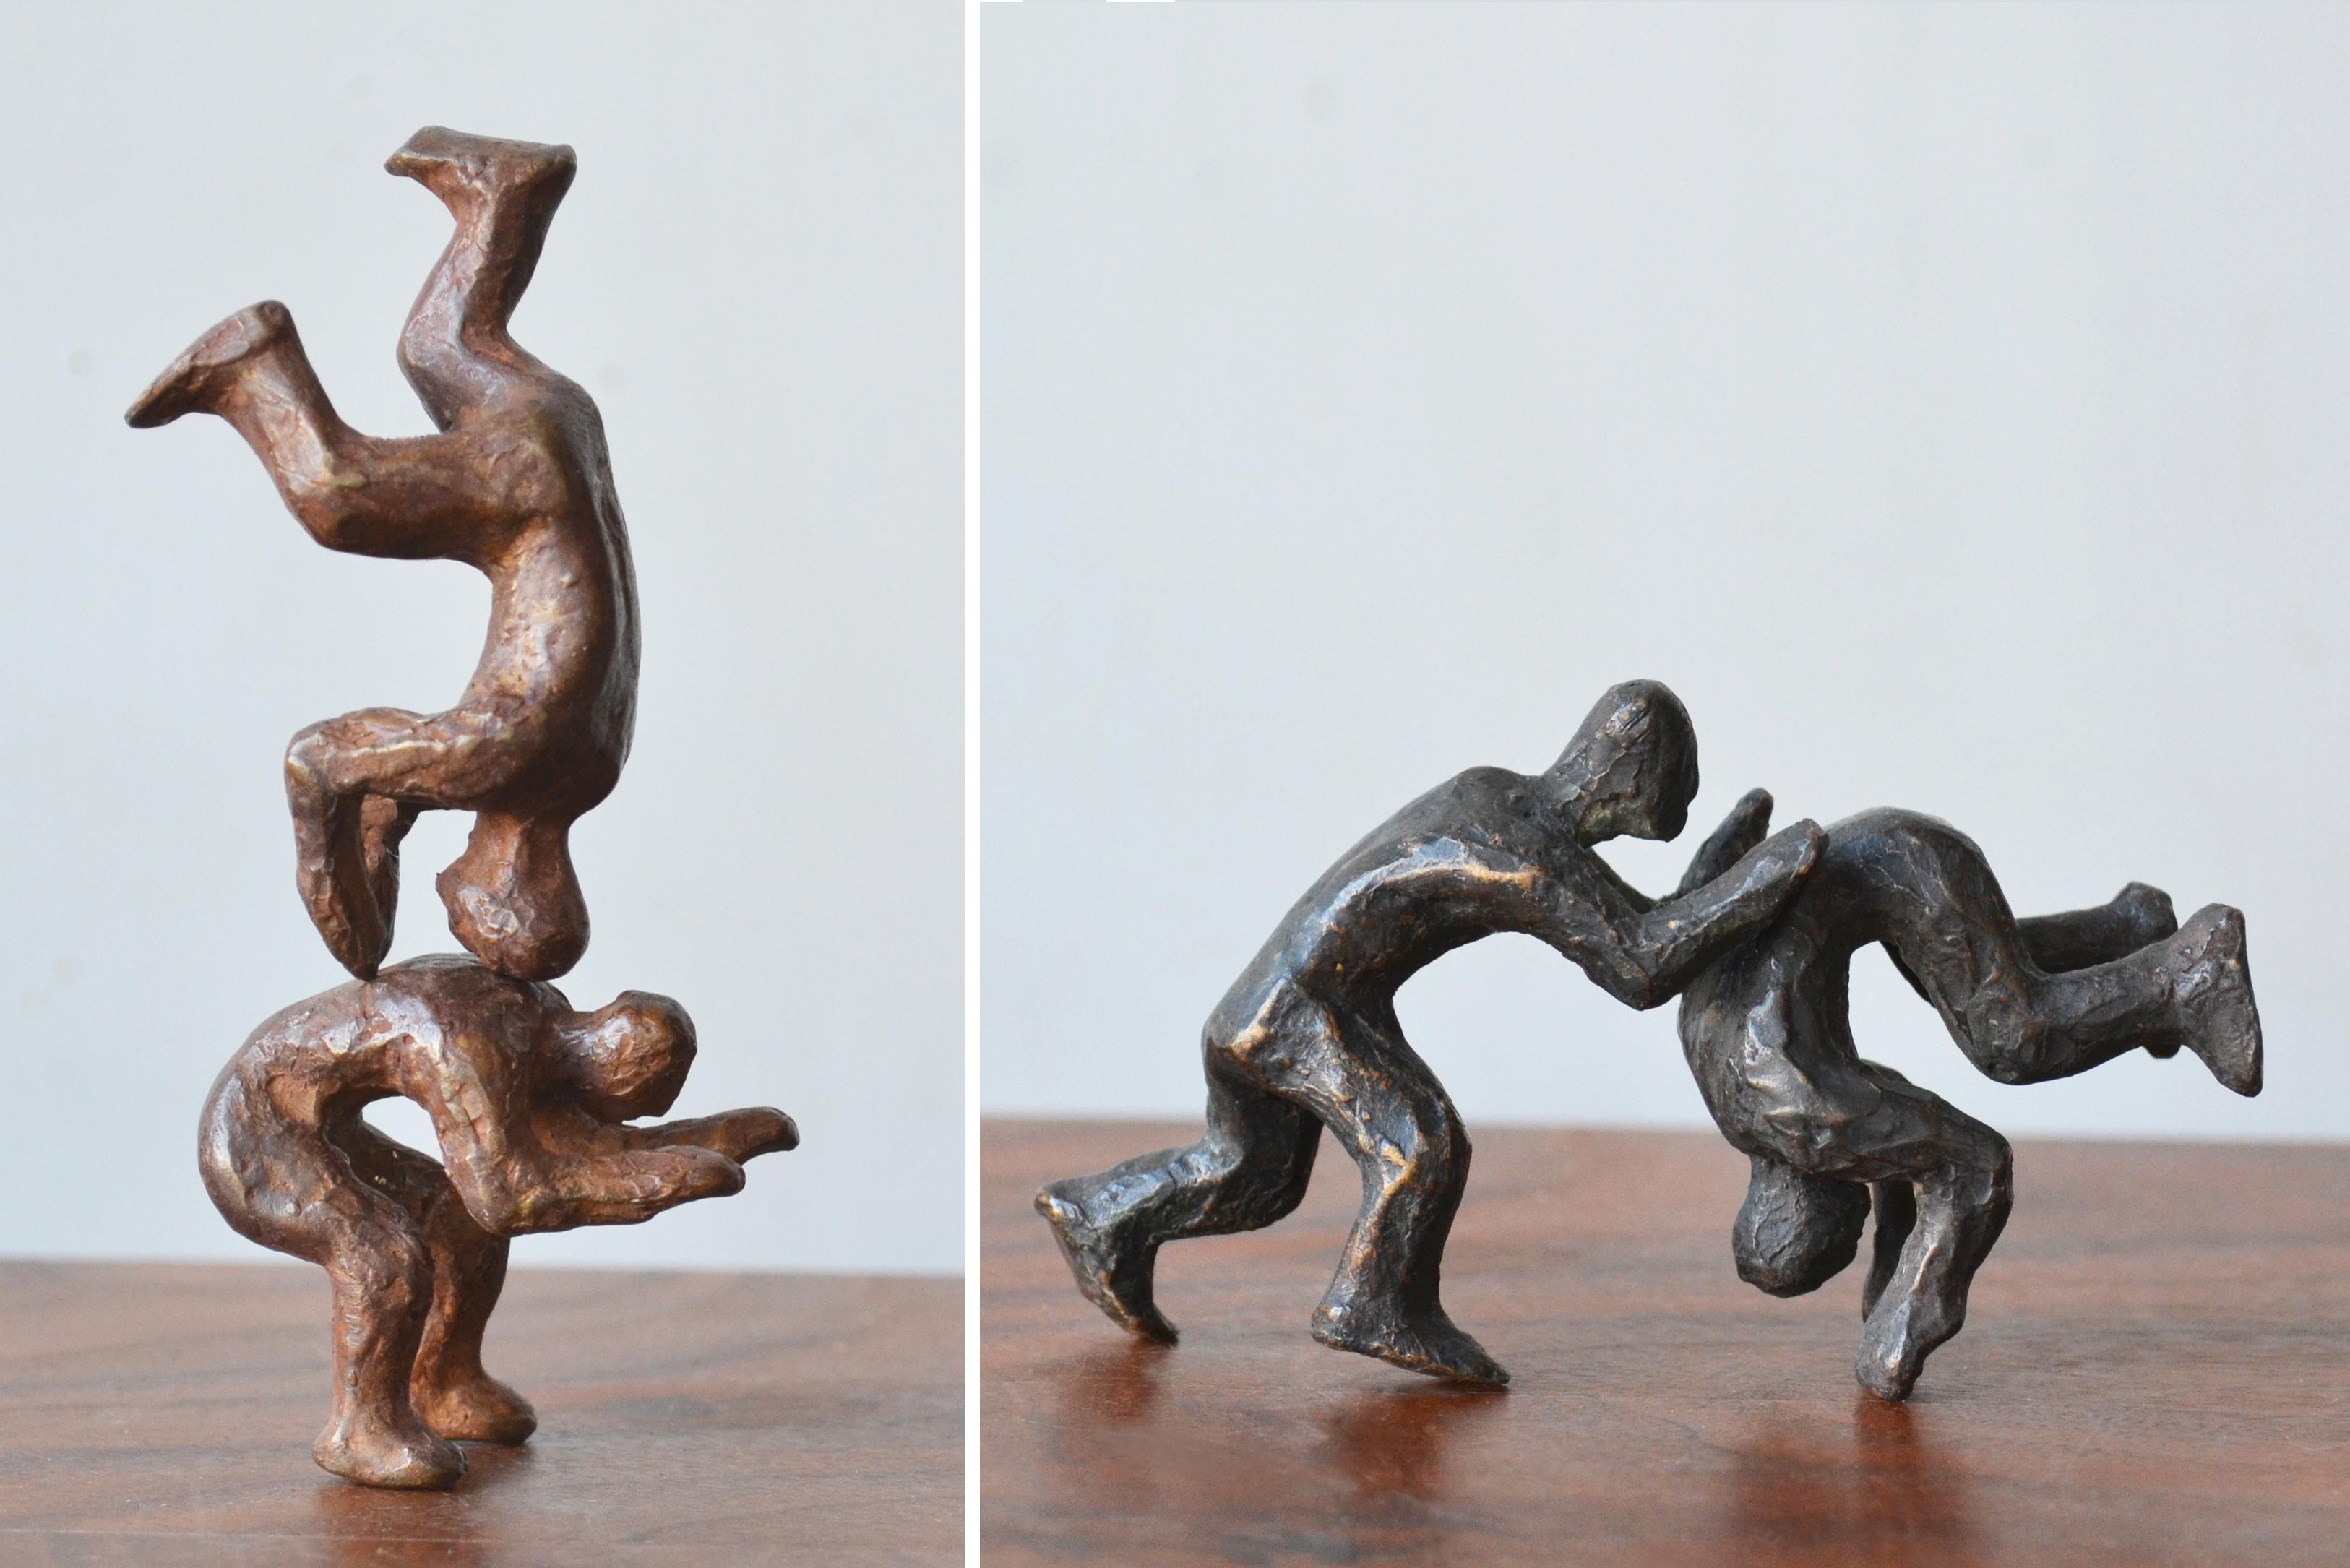 Noa Bornstein Figurative Sculpture - "Why Fight When You Can Play?" 2 pairs of interactive bronze figures